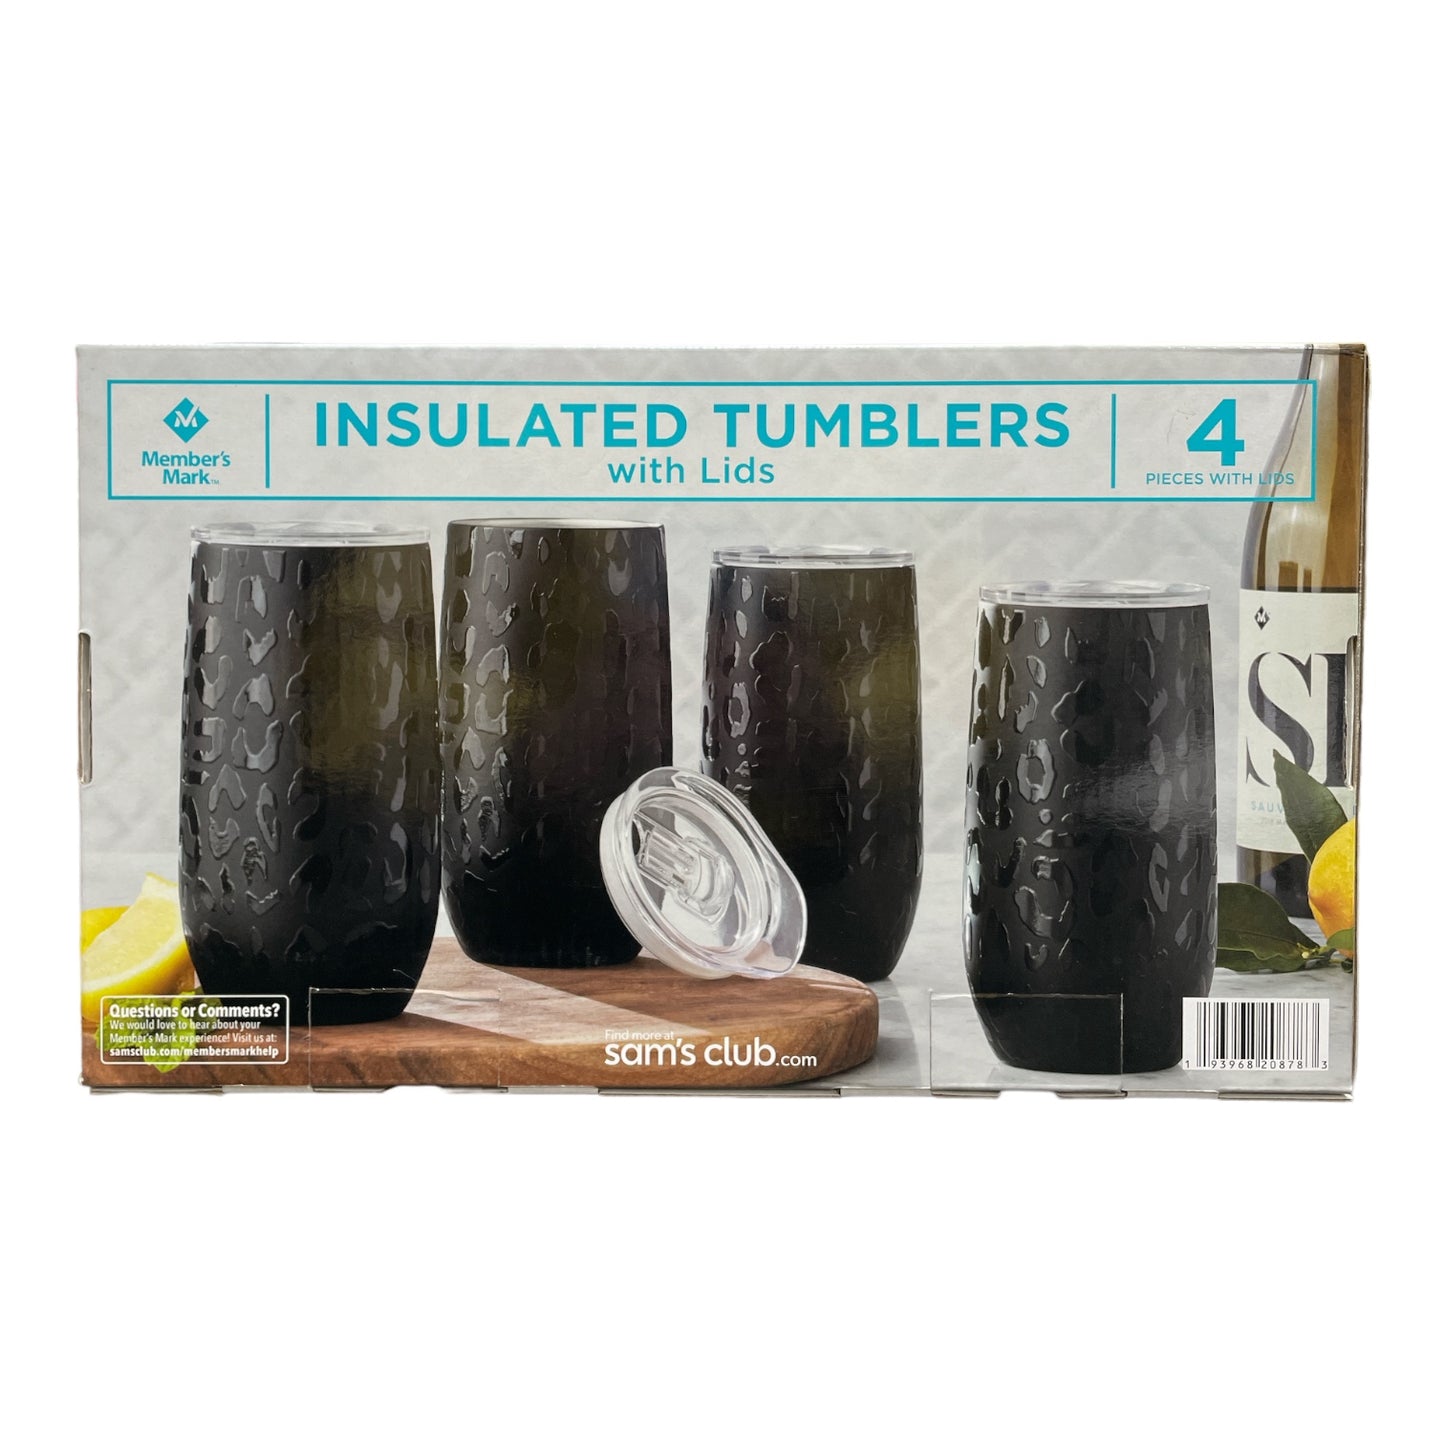 Member's Mark 14oz Insulated Tumblers, 4 Piece with Lids, Black Animal Print